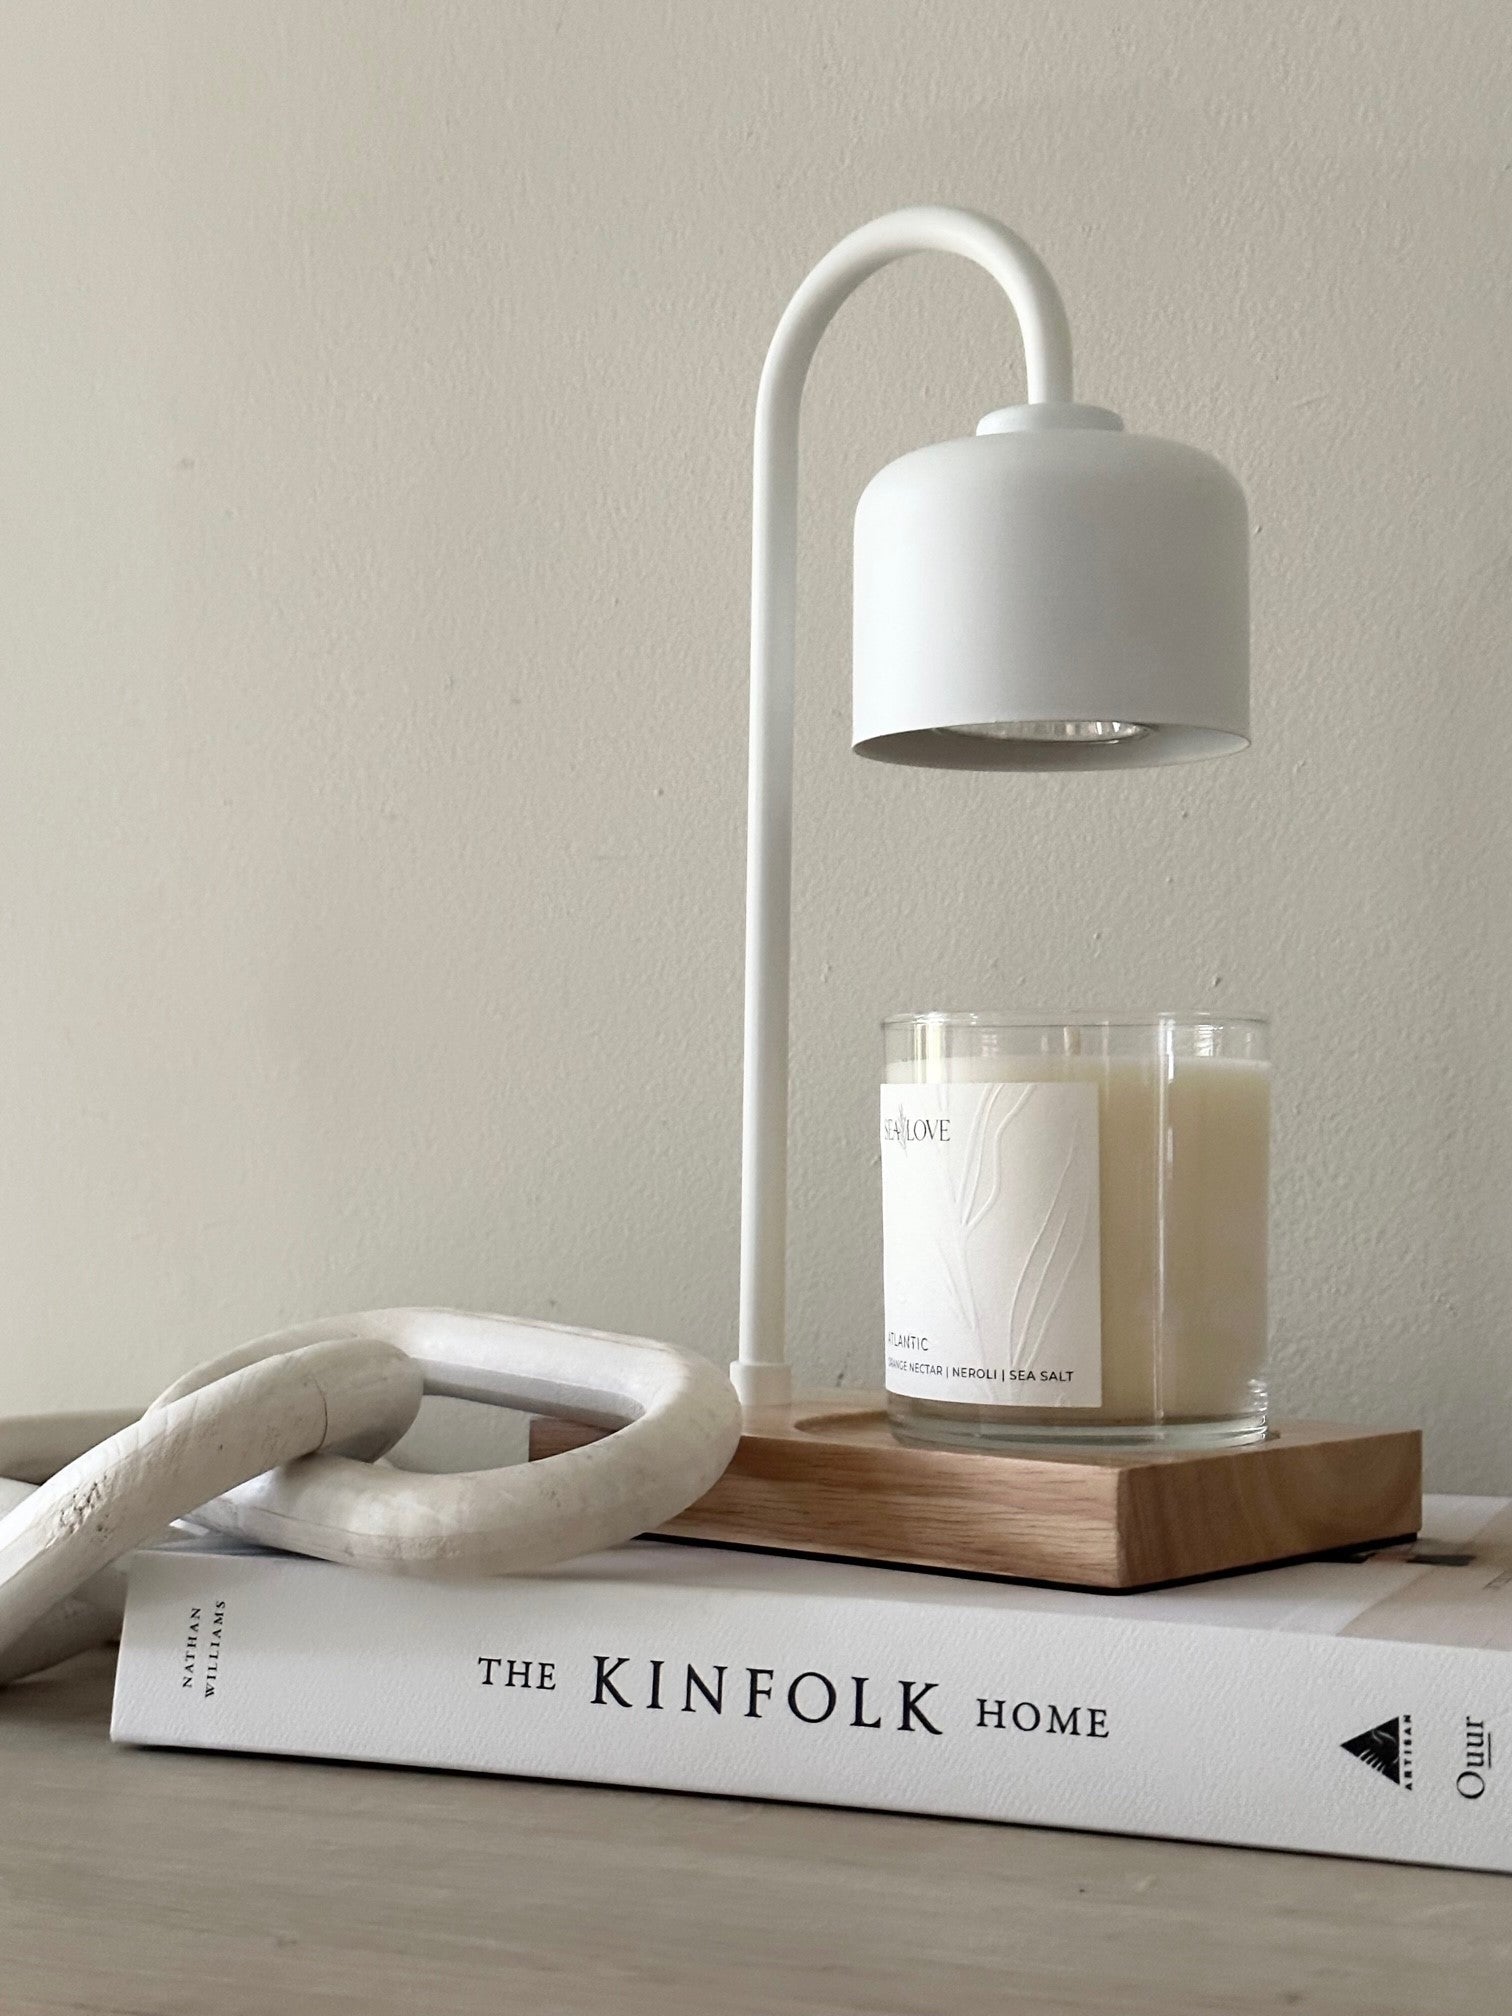 A serene and stylish corner featuring a modern white desk lamp perched atop a stack of design books, with a decorative knot sculpture and a lit scented candle providing a cozy ambiance.